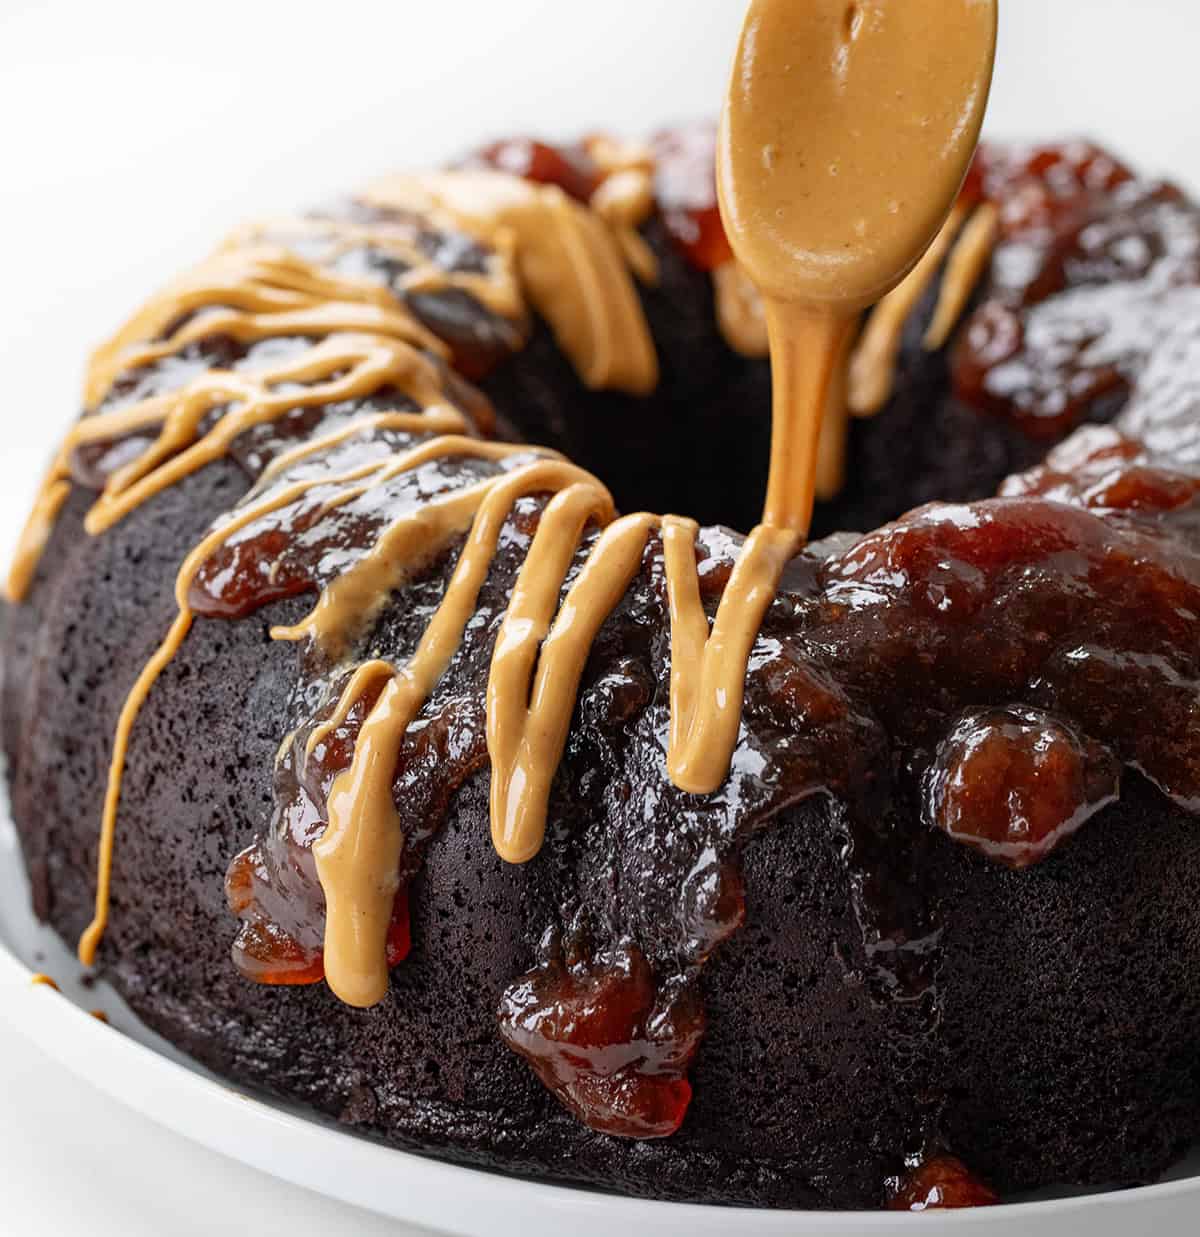 Drizzling peanut butter over jelly on a chocolate bundt cake with peanut butter hidden inside.